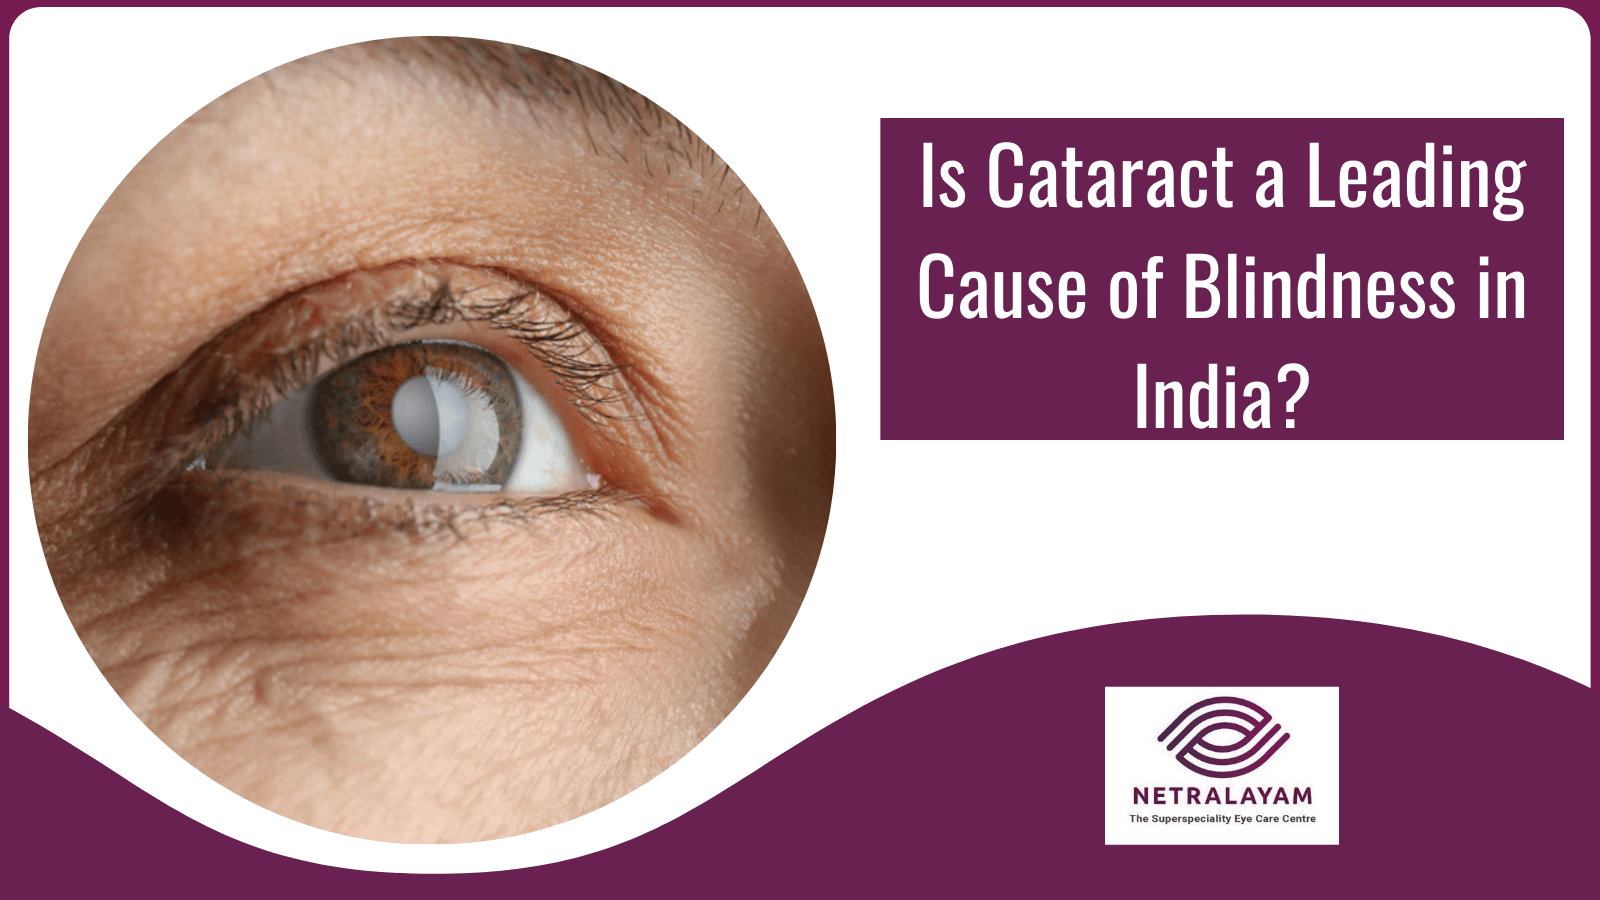 Is Cataract a Leading Cause of Blindness in India?